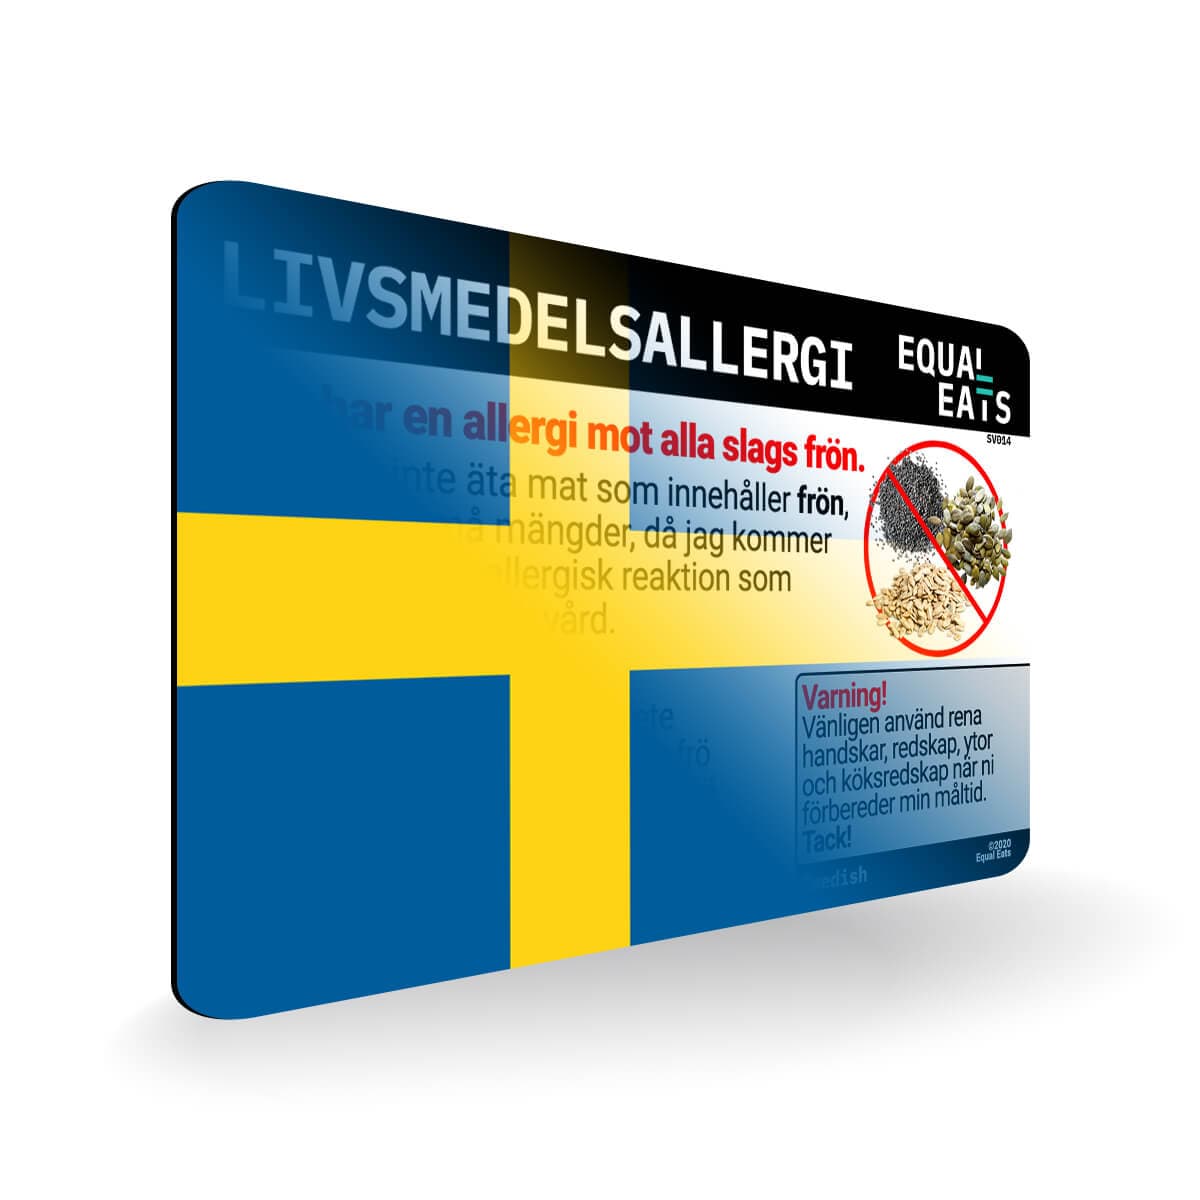 Seed Allergy in Swedish. Seed Allergy Card for Sweden